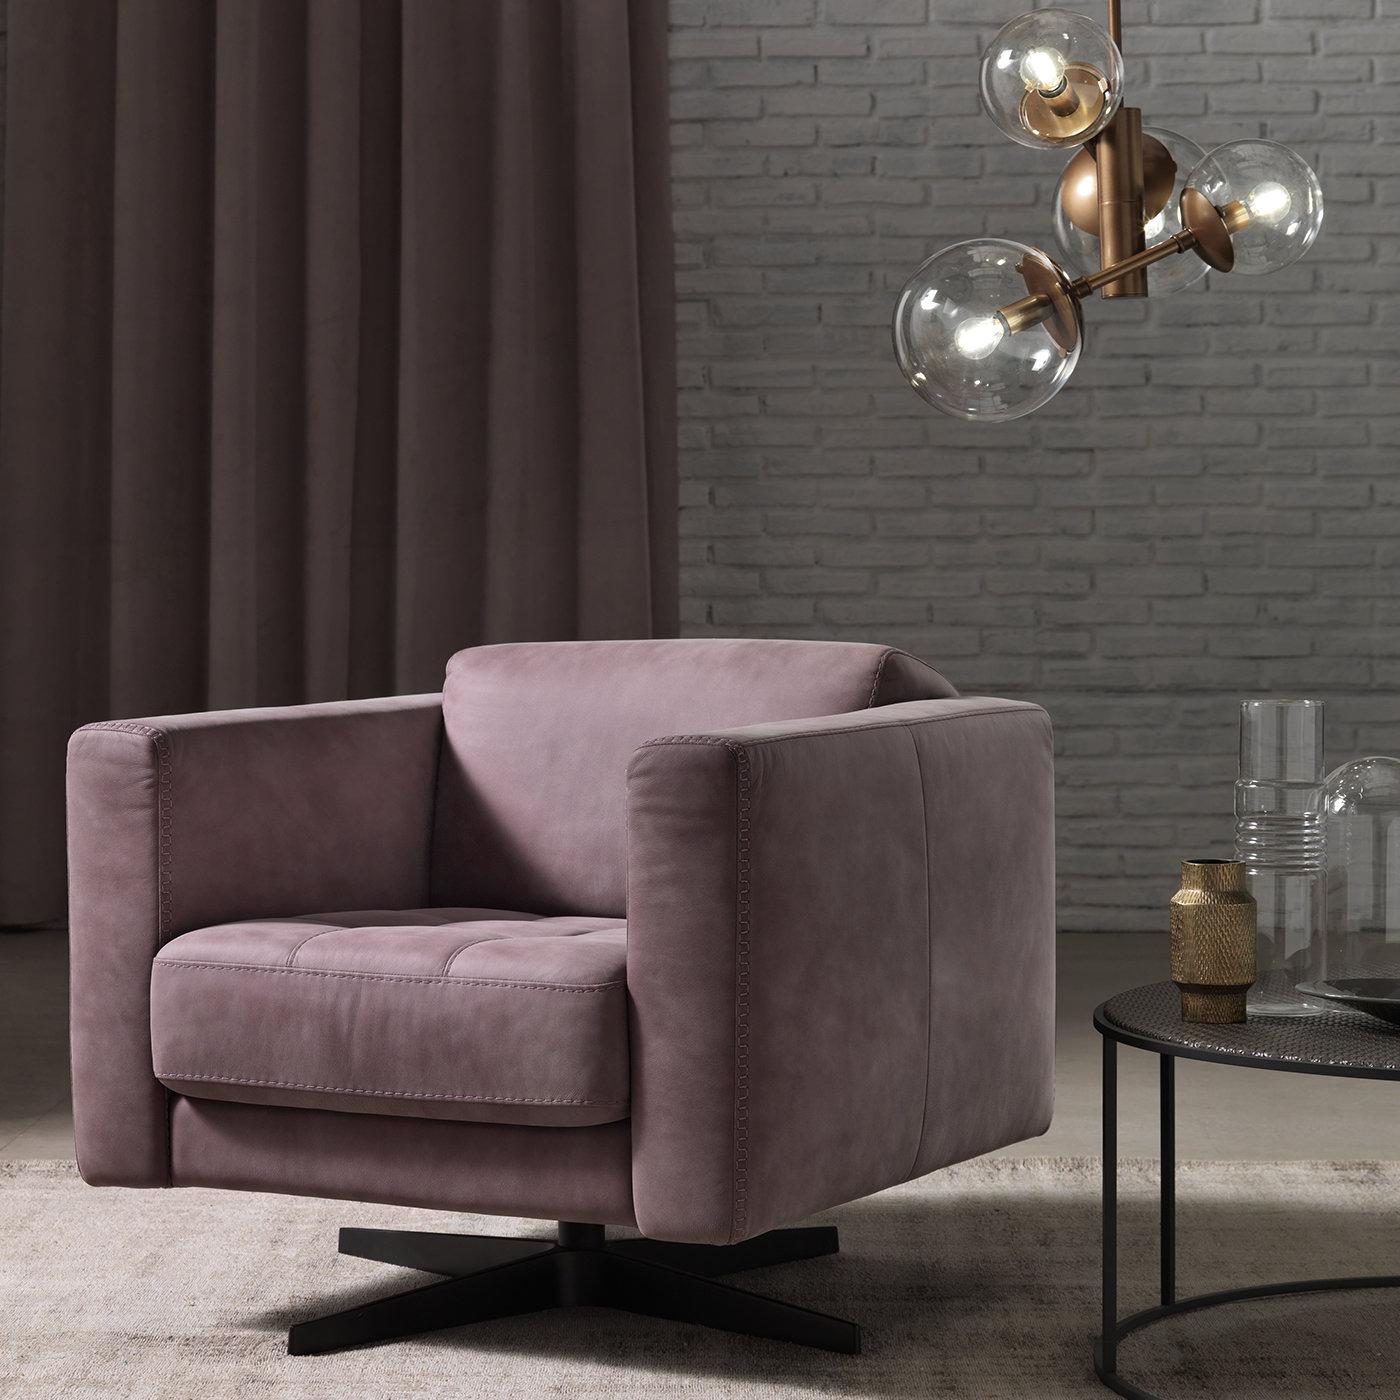 Boasting a rigorous yet enveloping silhouette covered in stain-resistant purple leather, this classy armchair will impeccably blend in residential and commercial settings, alike. The four-spoke metal base lacquered in black sustains the seating